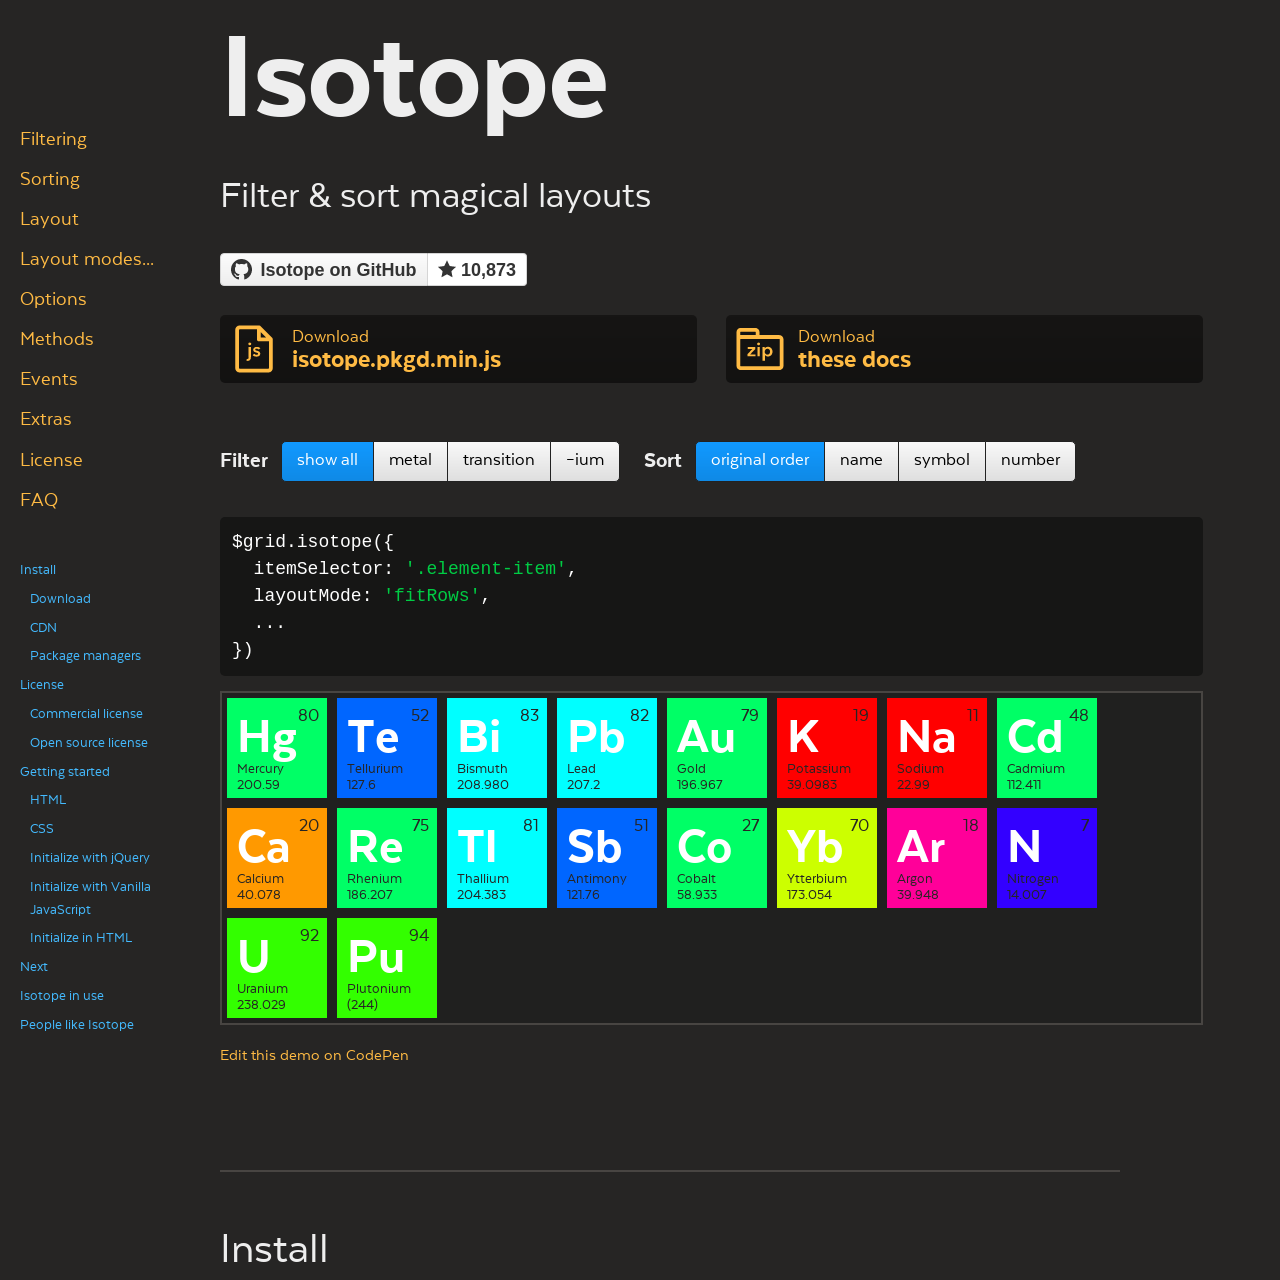 Screenshot of Isotope website